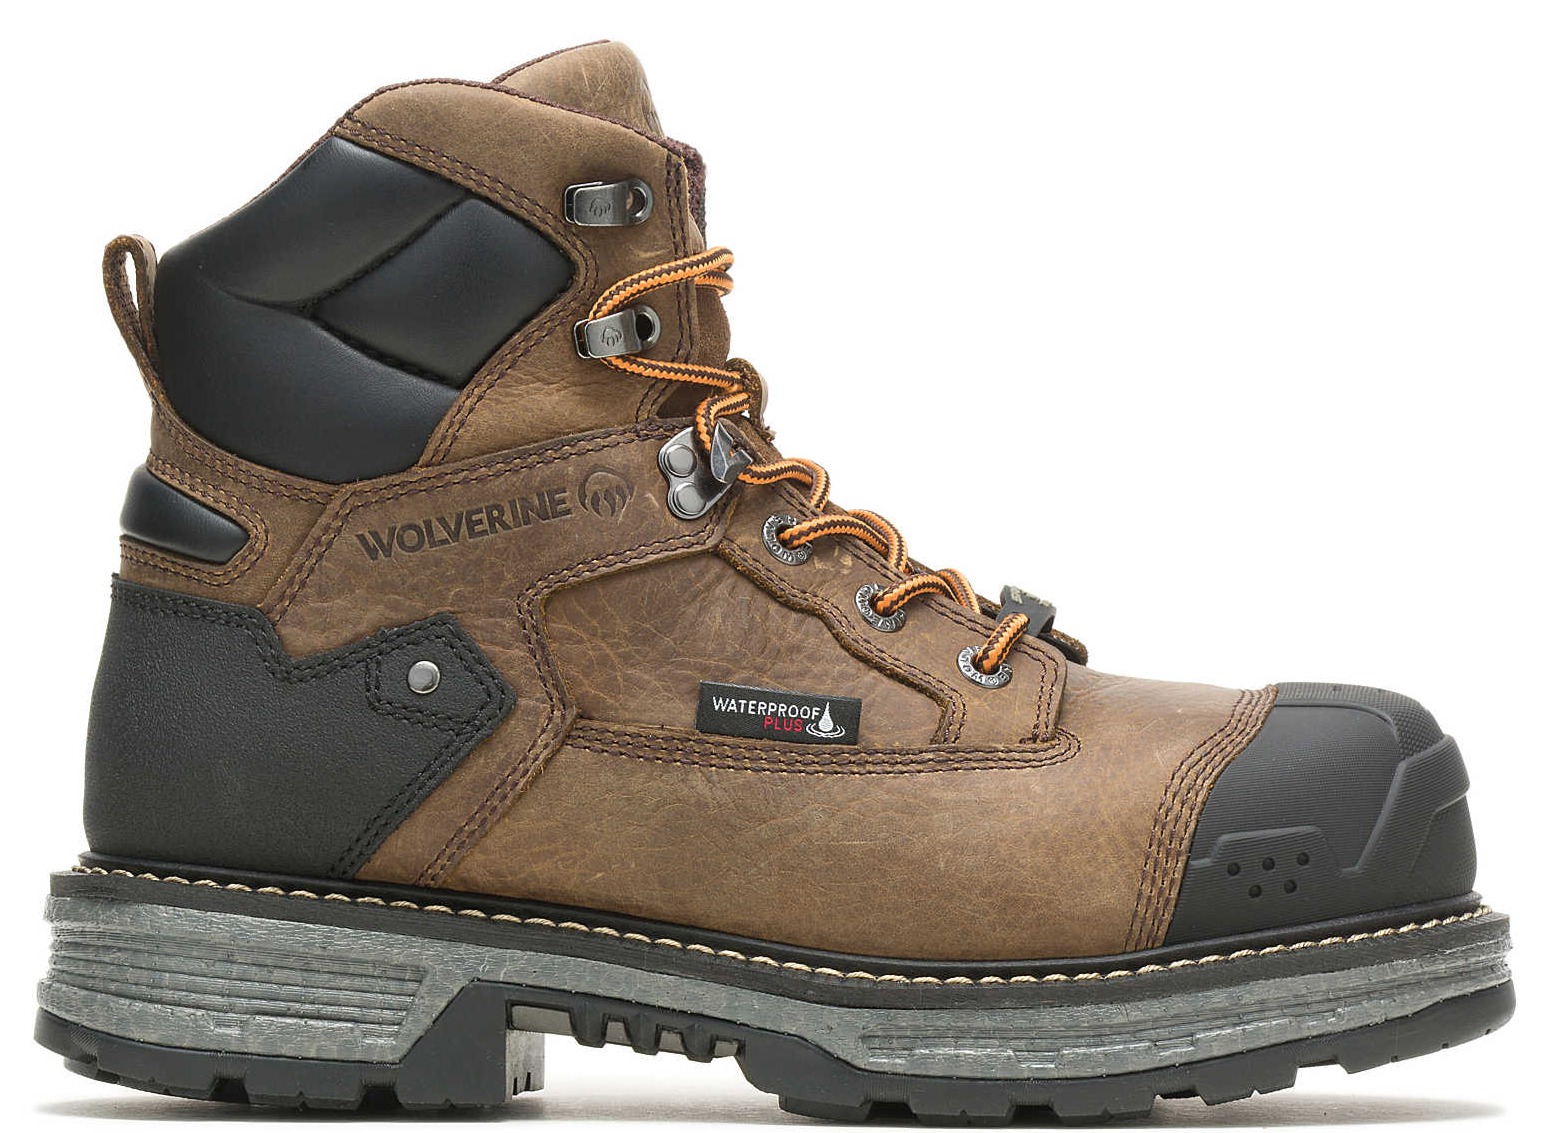 Wolverine Men's & Women's Boots $75 + Free Shipping